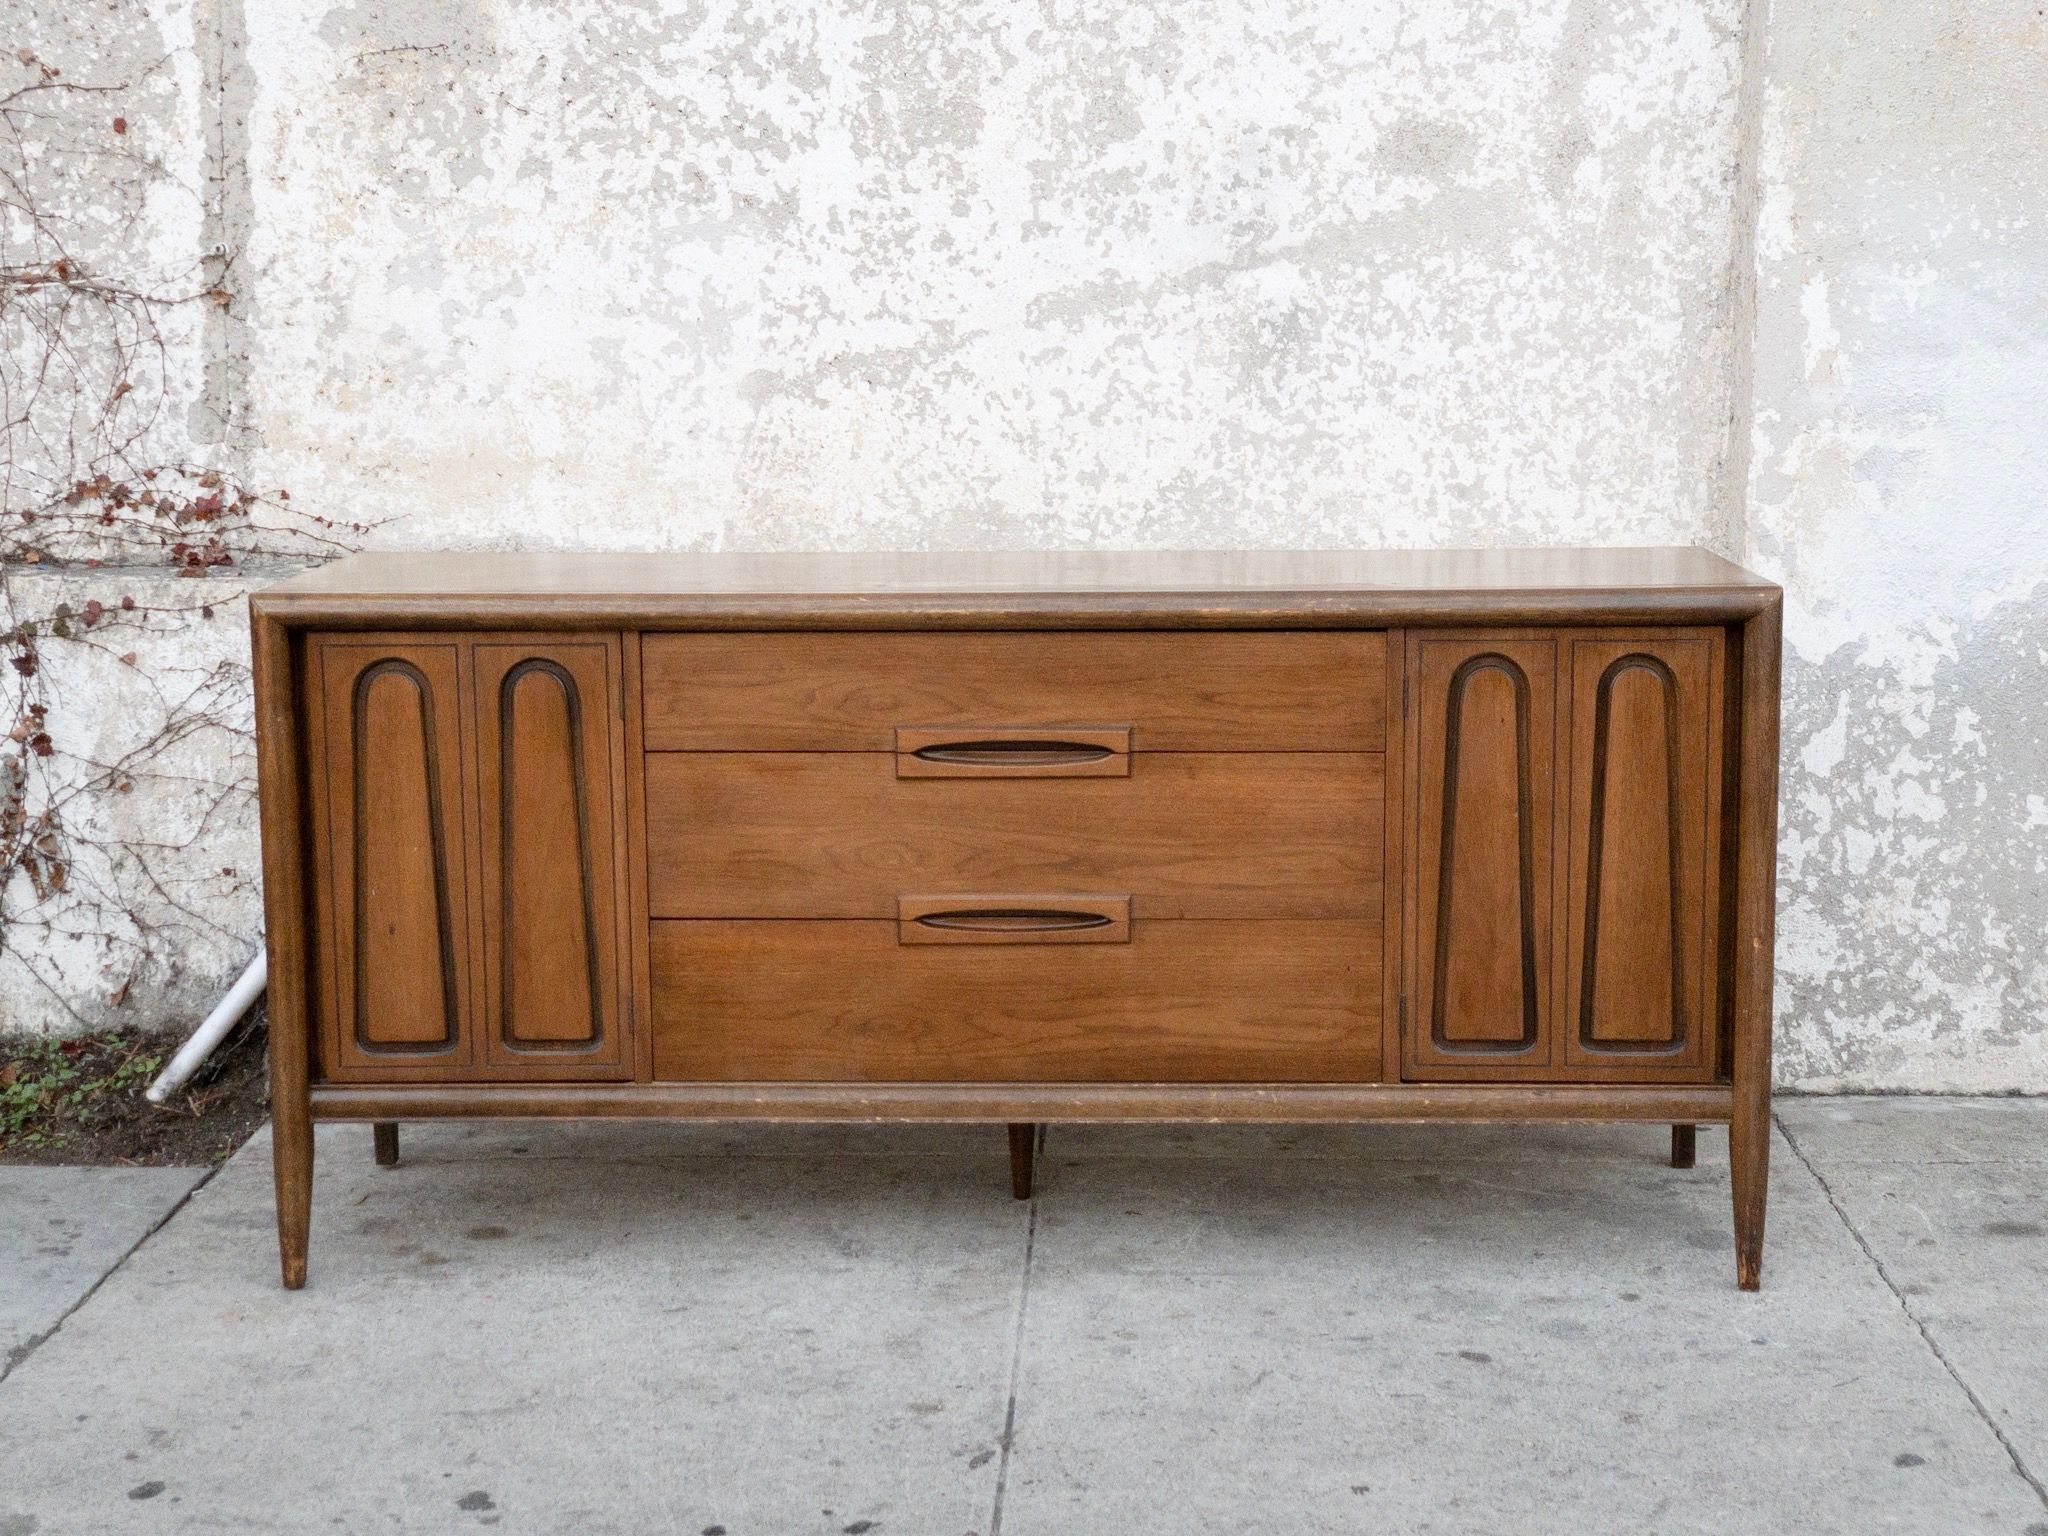 Vintage Bassett Credenza | Another New Place In 2019 Throughout Candide Wood Credenzas (View 5 of 30)